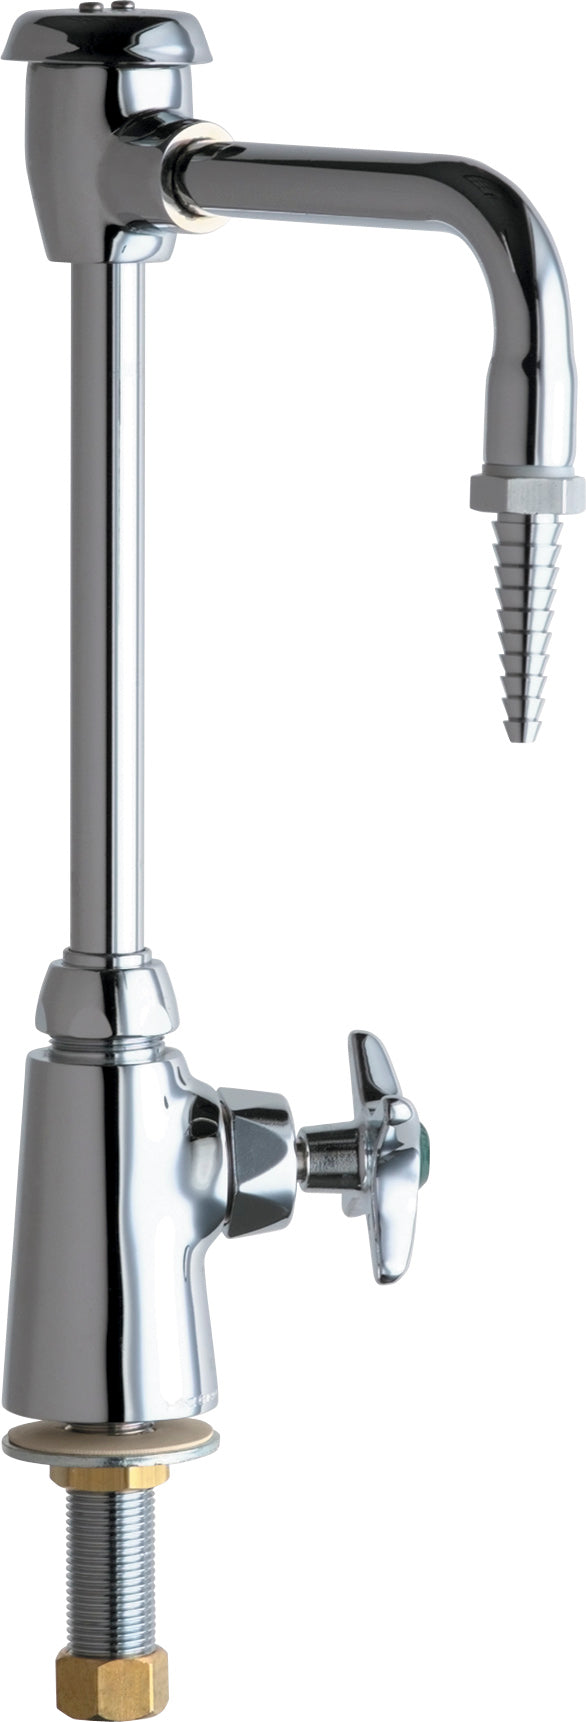 Chicago Faucets Laboratory Sink Faucet 928-HWCP